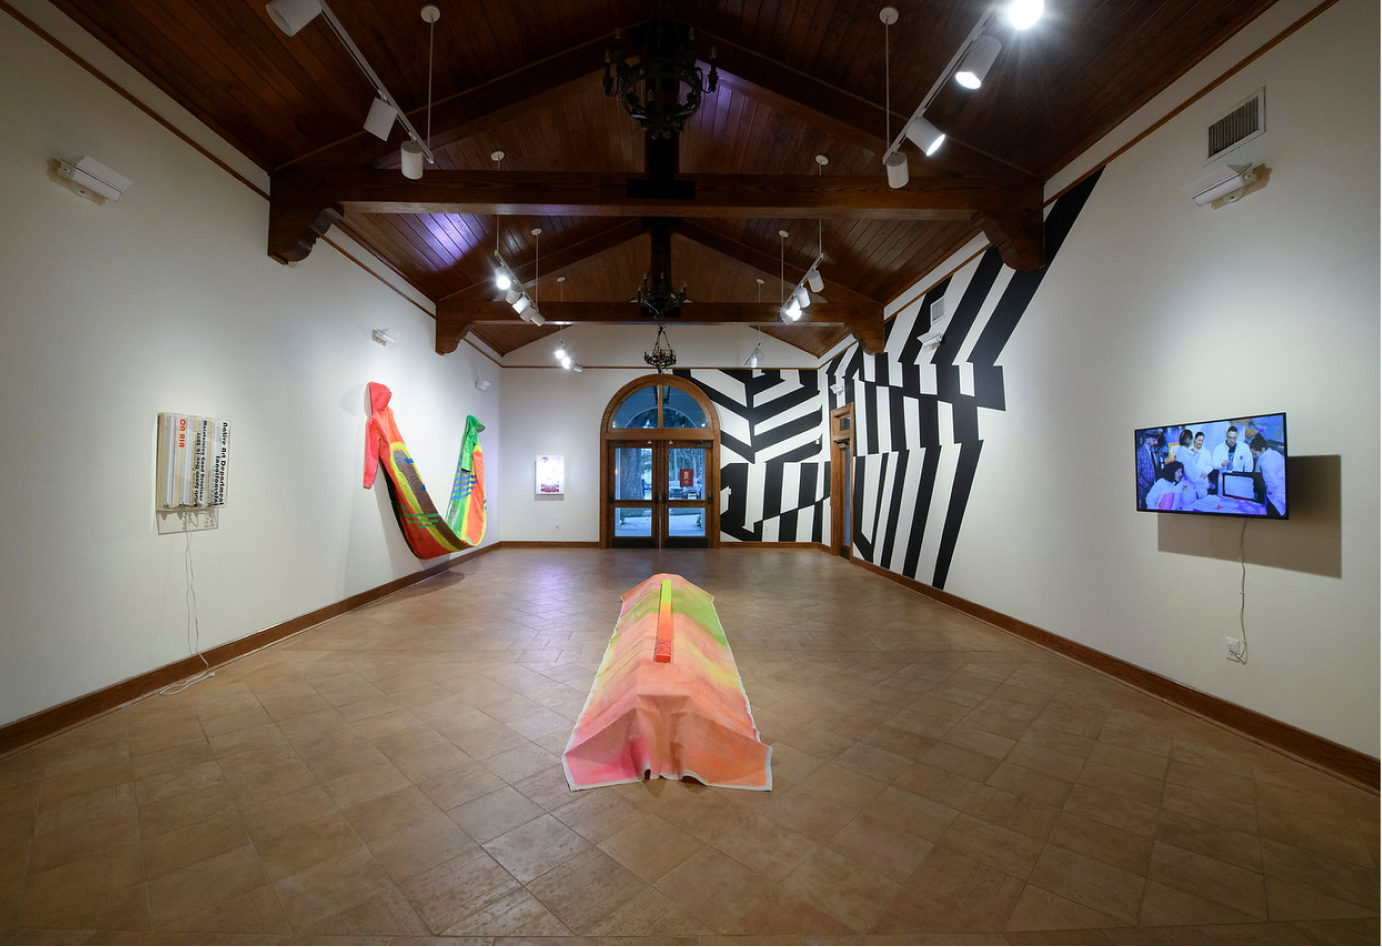 Exhibition view of Bureau of Aesthetics, featuring multiple pieces of work